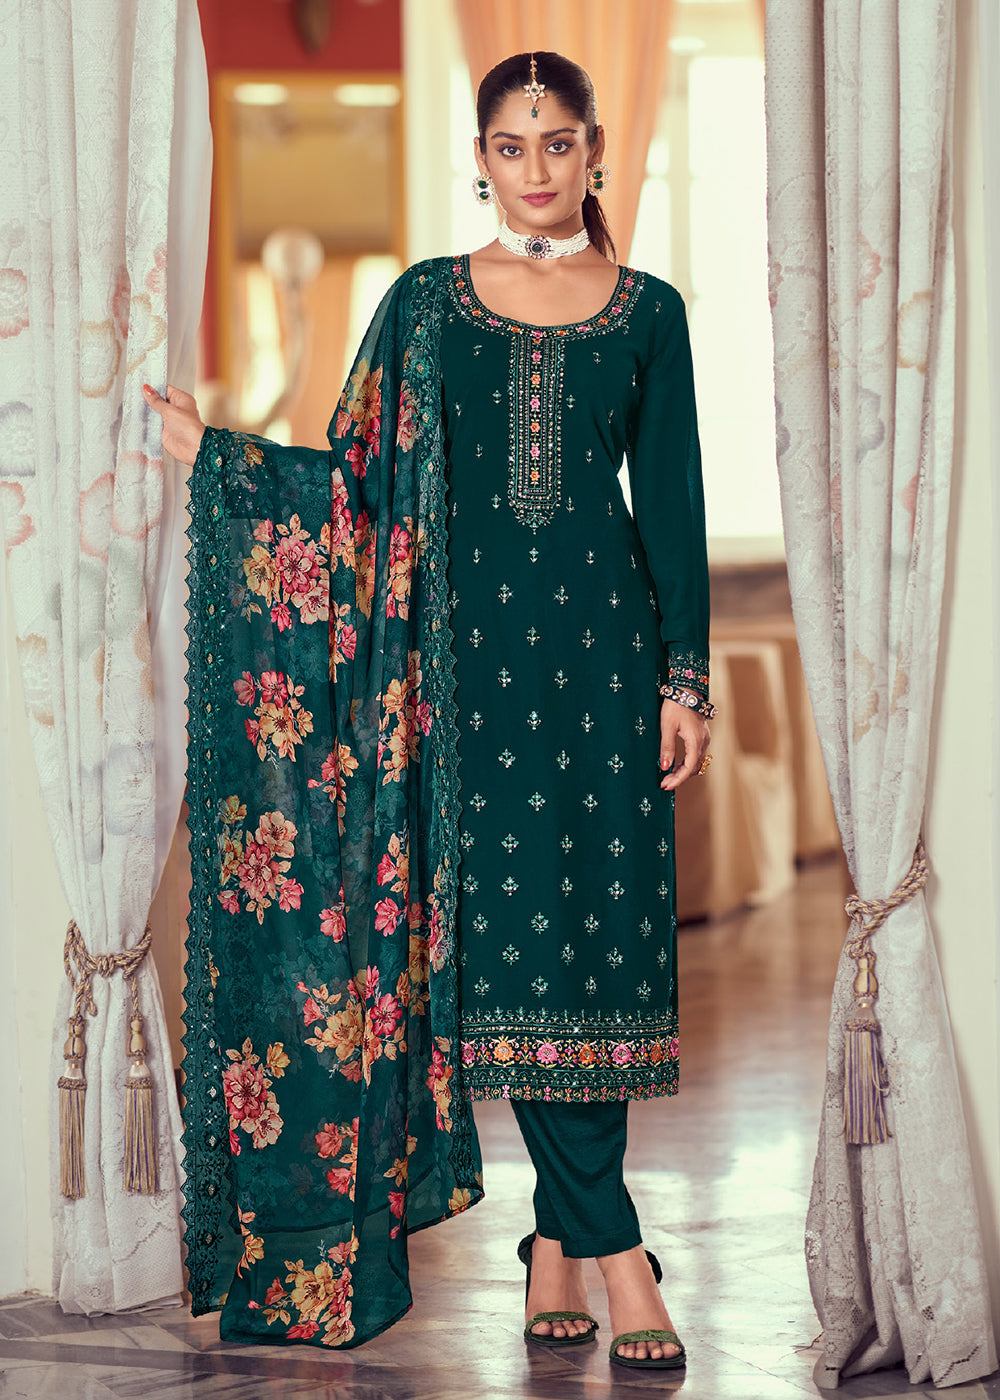 Buy Now Heavy Embroidered Classy Teal Georgette Festive Salwar Suit Online in USA, UK, Canada, Germany, Australia & Worldwide at Empress Clothing. 